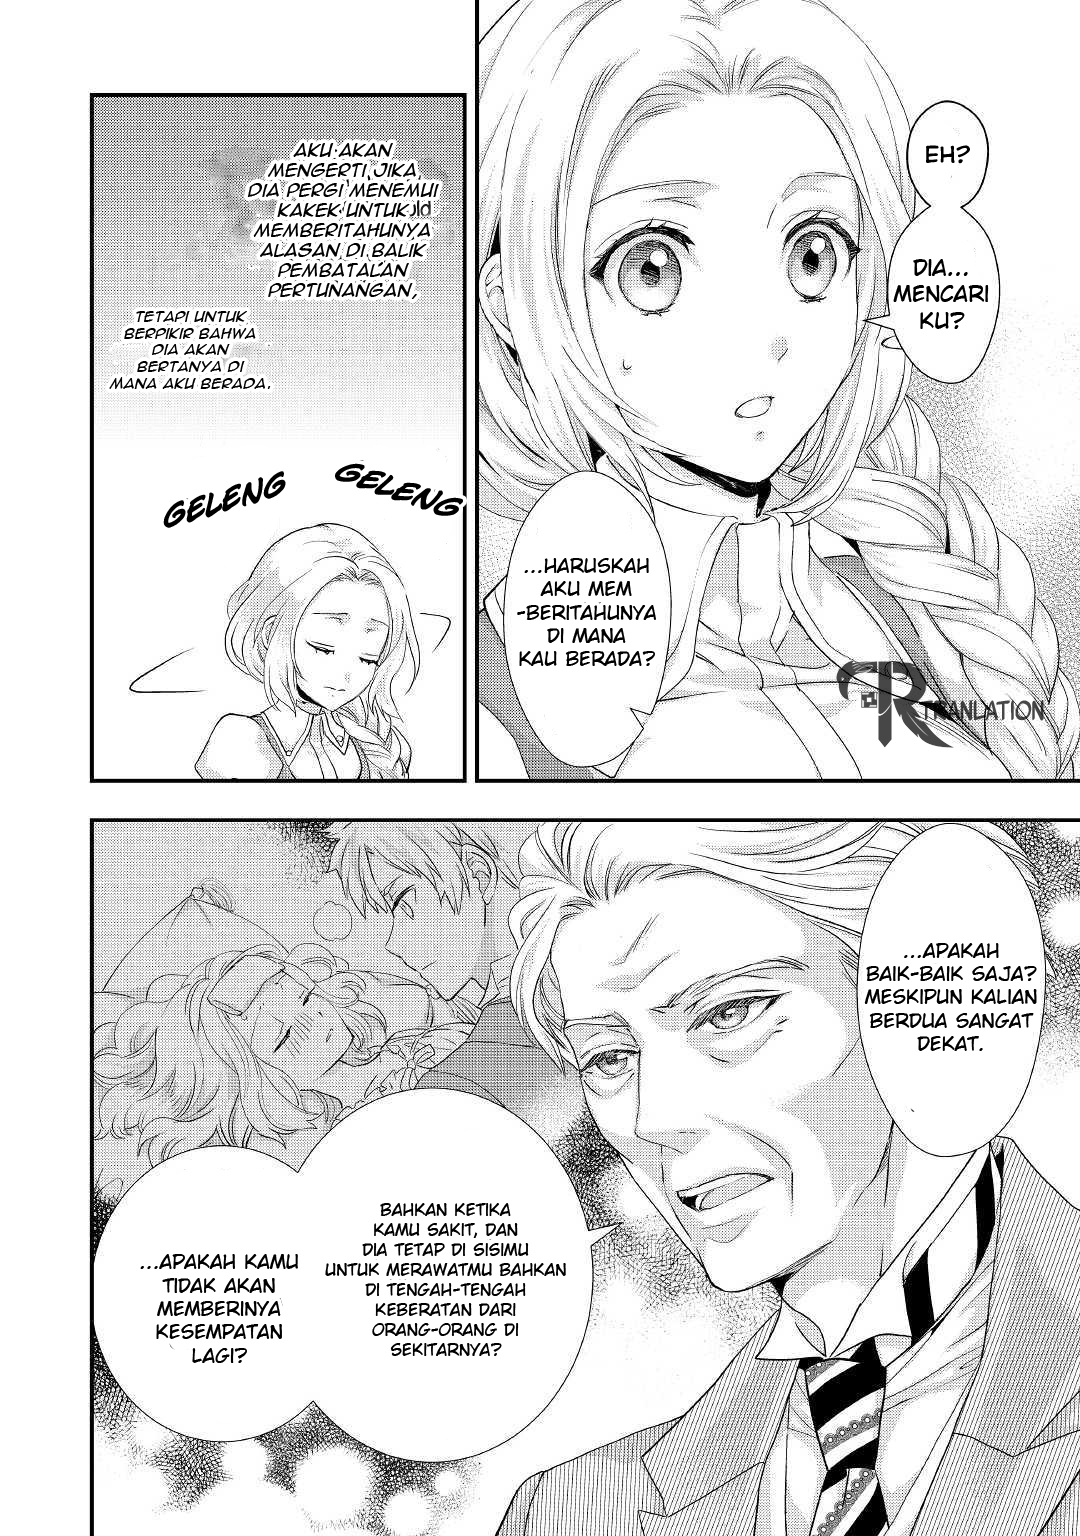 Milady Just Wants to Relax Chapter 9.2